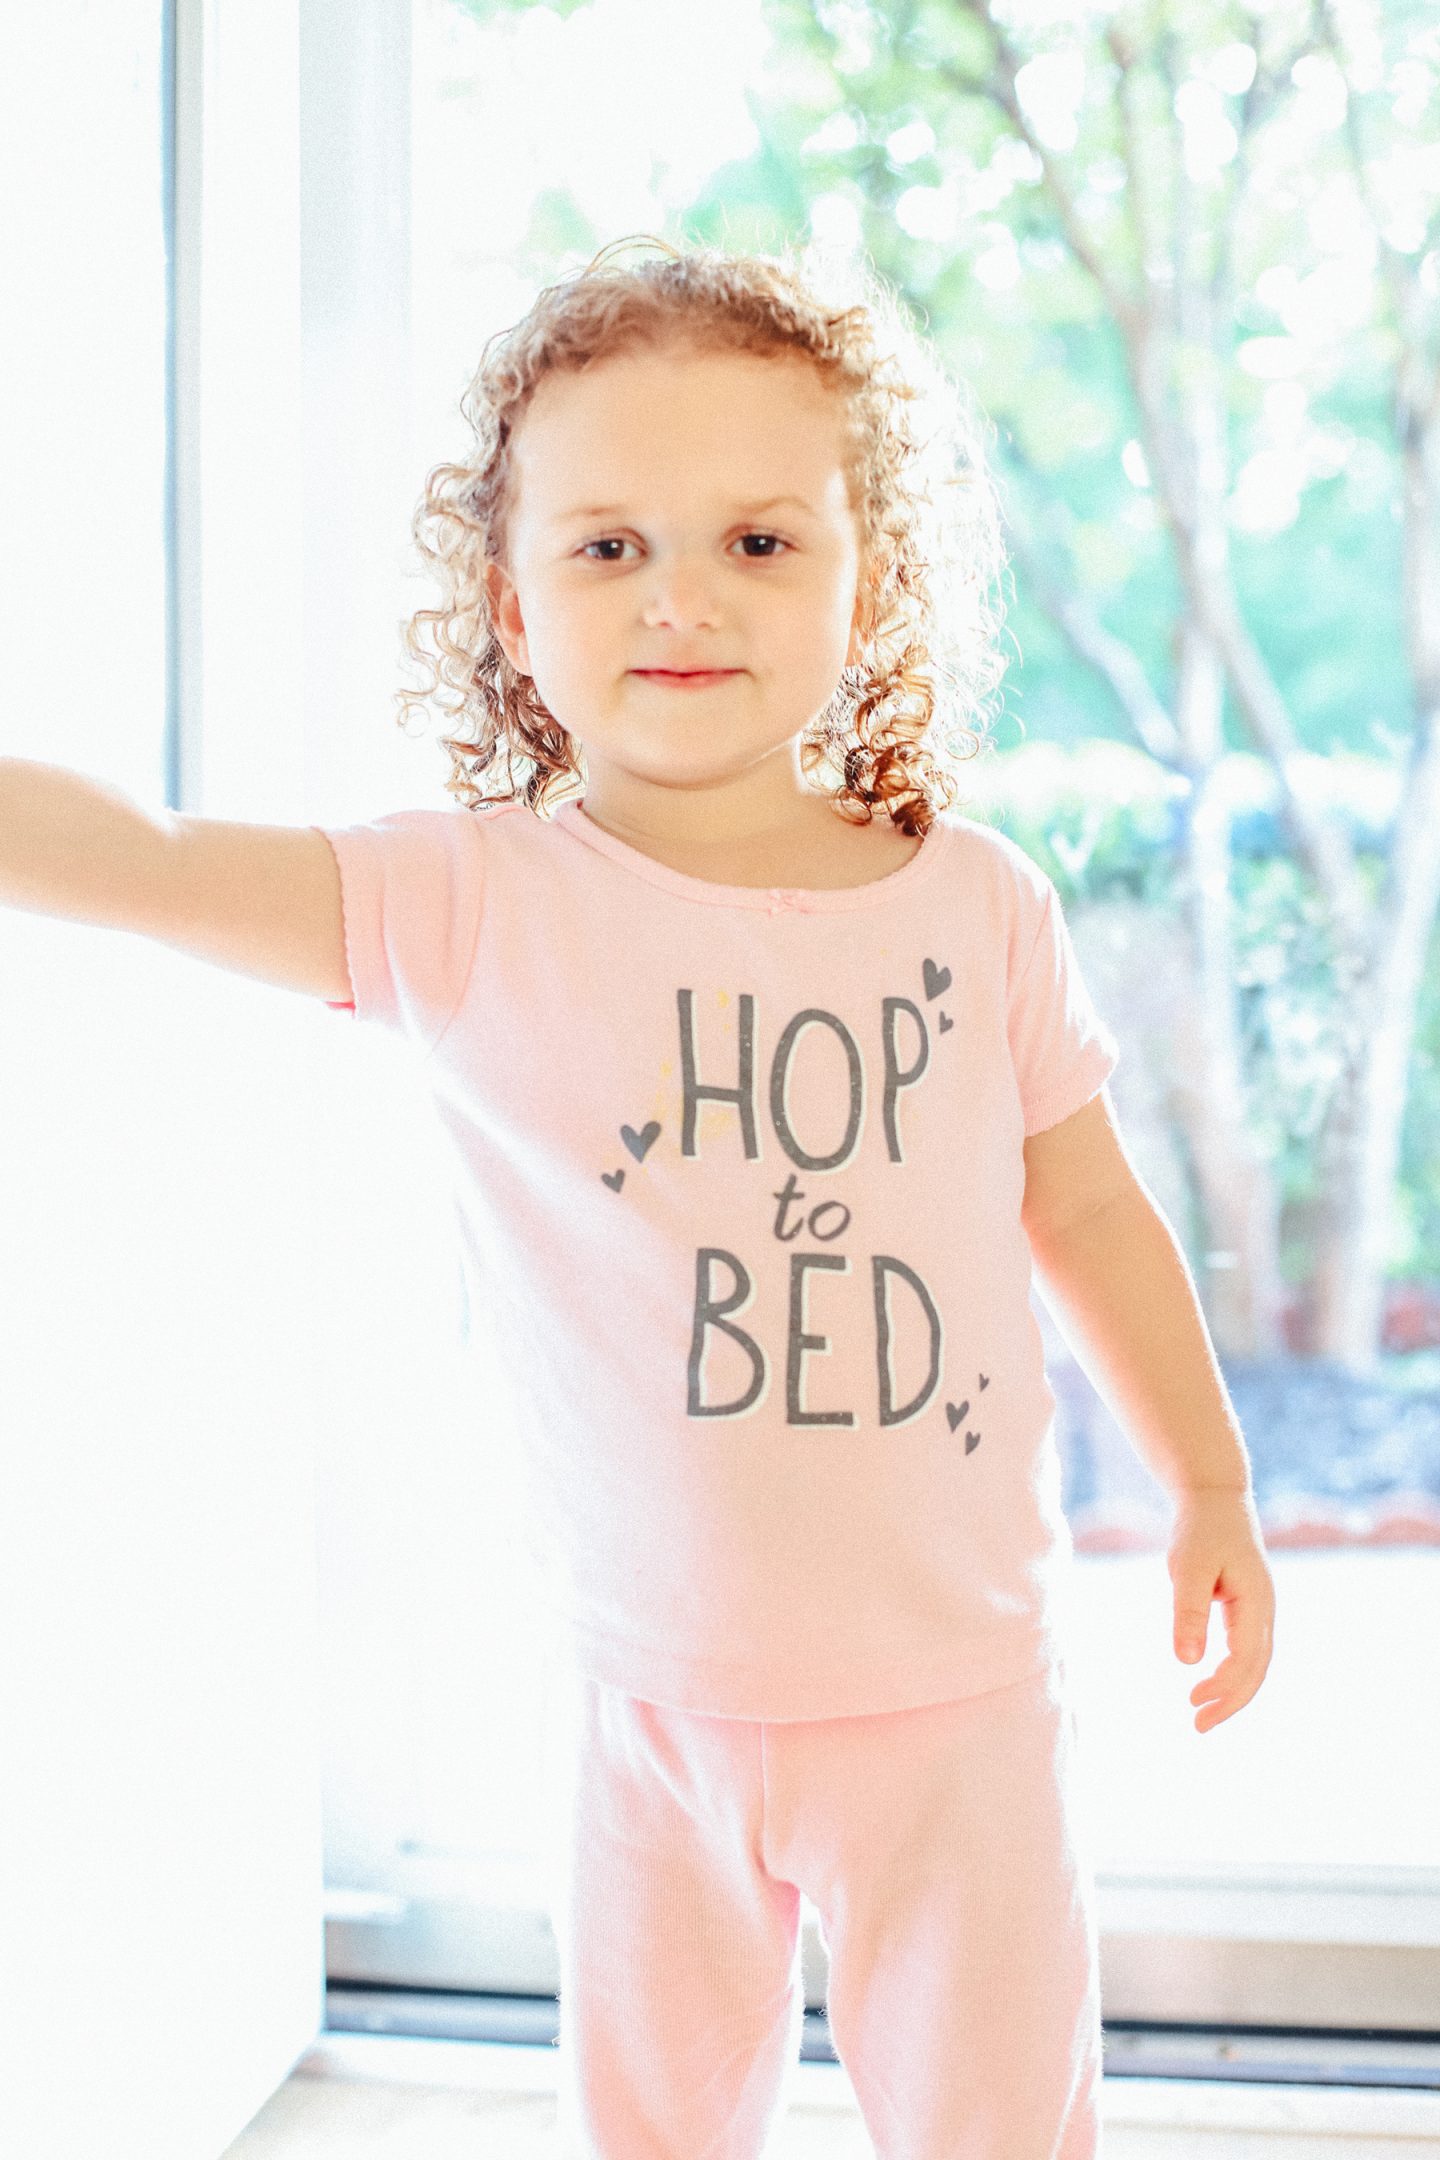 7 Healthy Bedtime Habits for Your Child